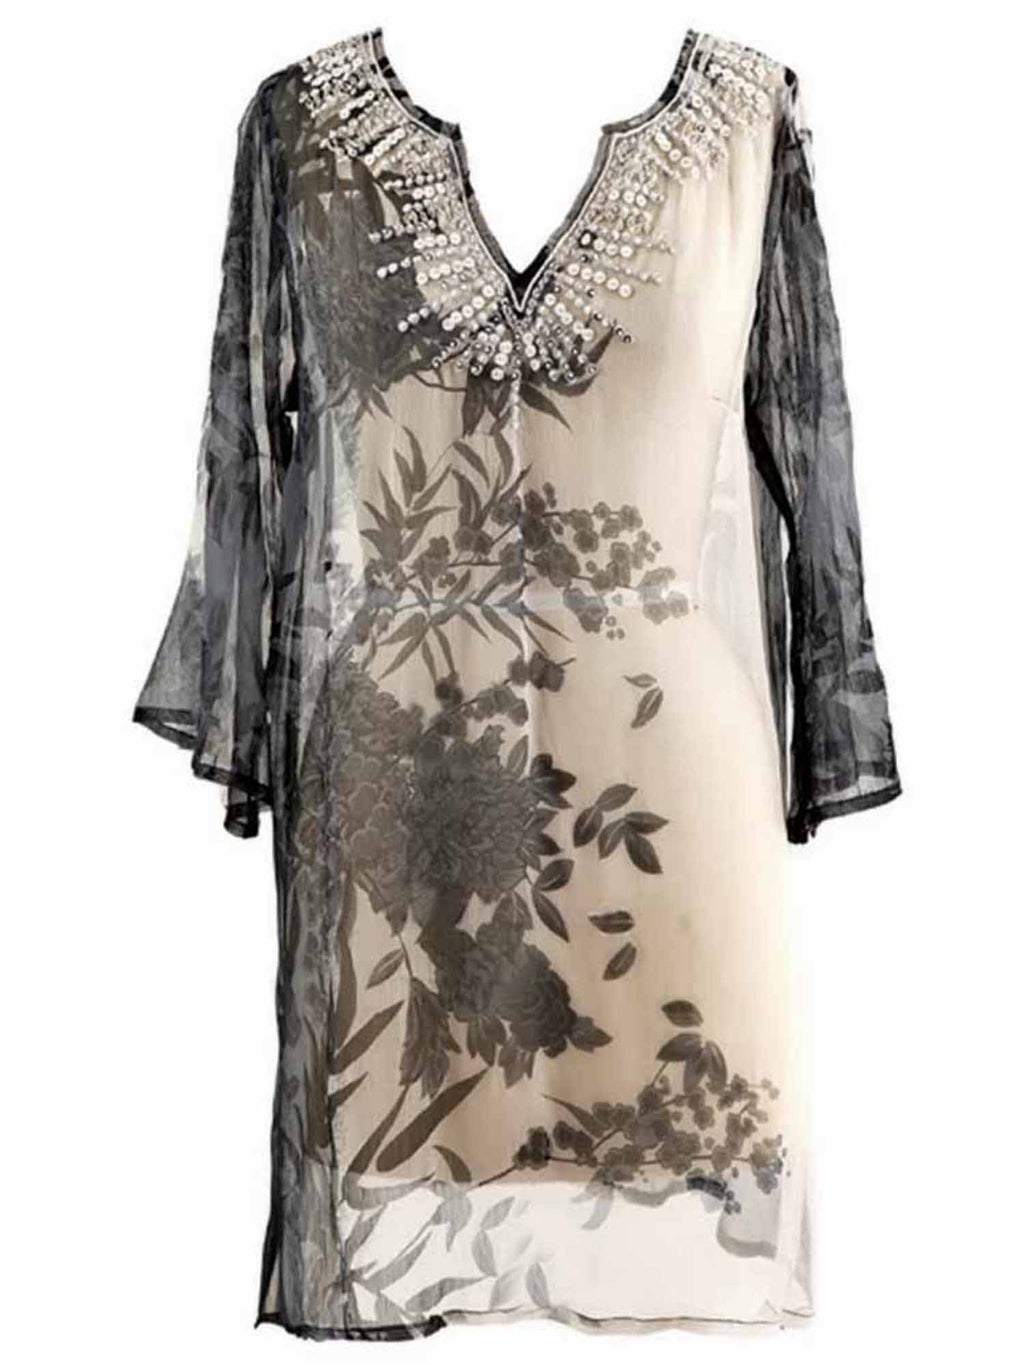 Elegant Gray & Beige Sheer Beach Cover-Up With Sequin Trim